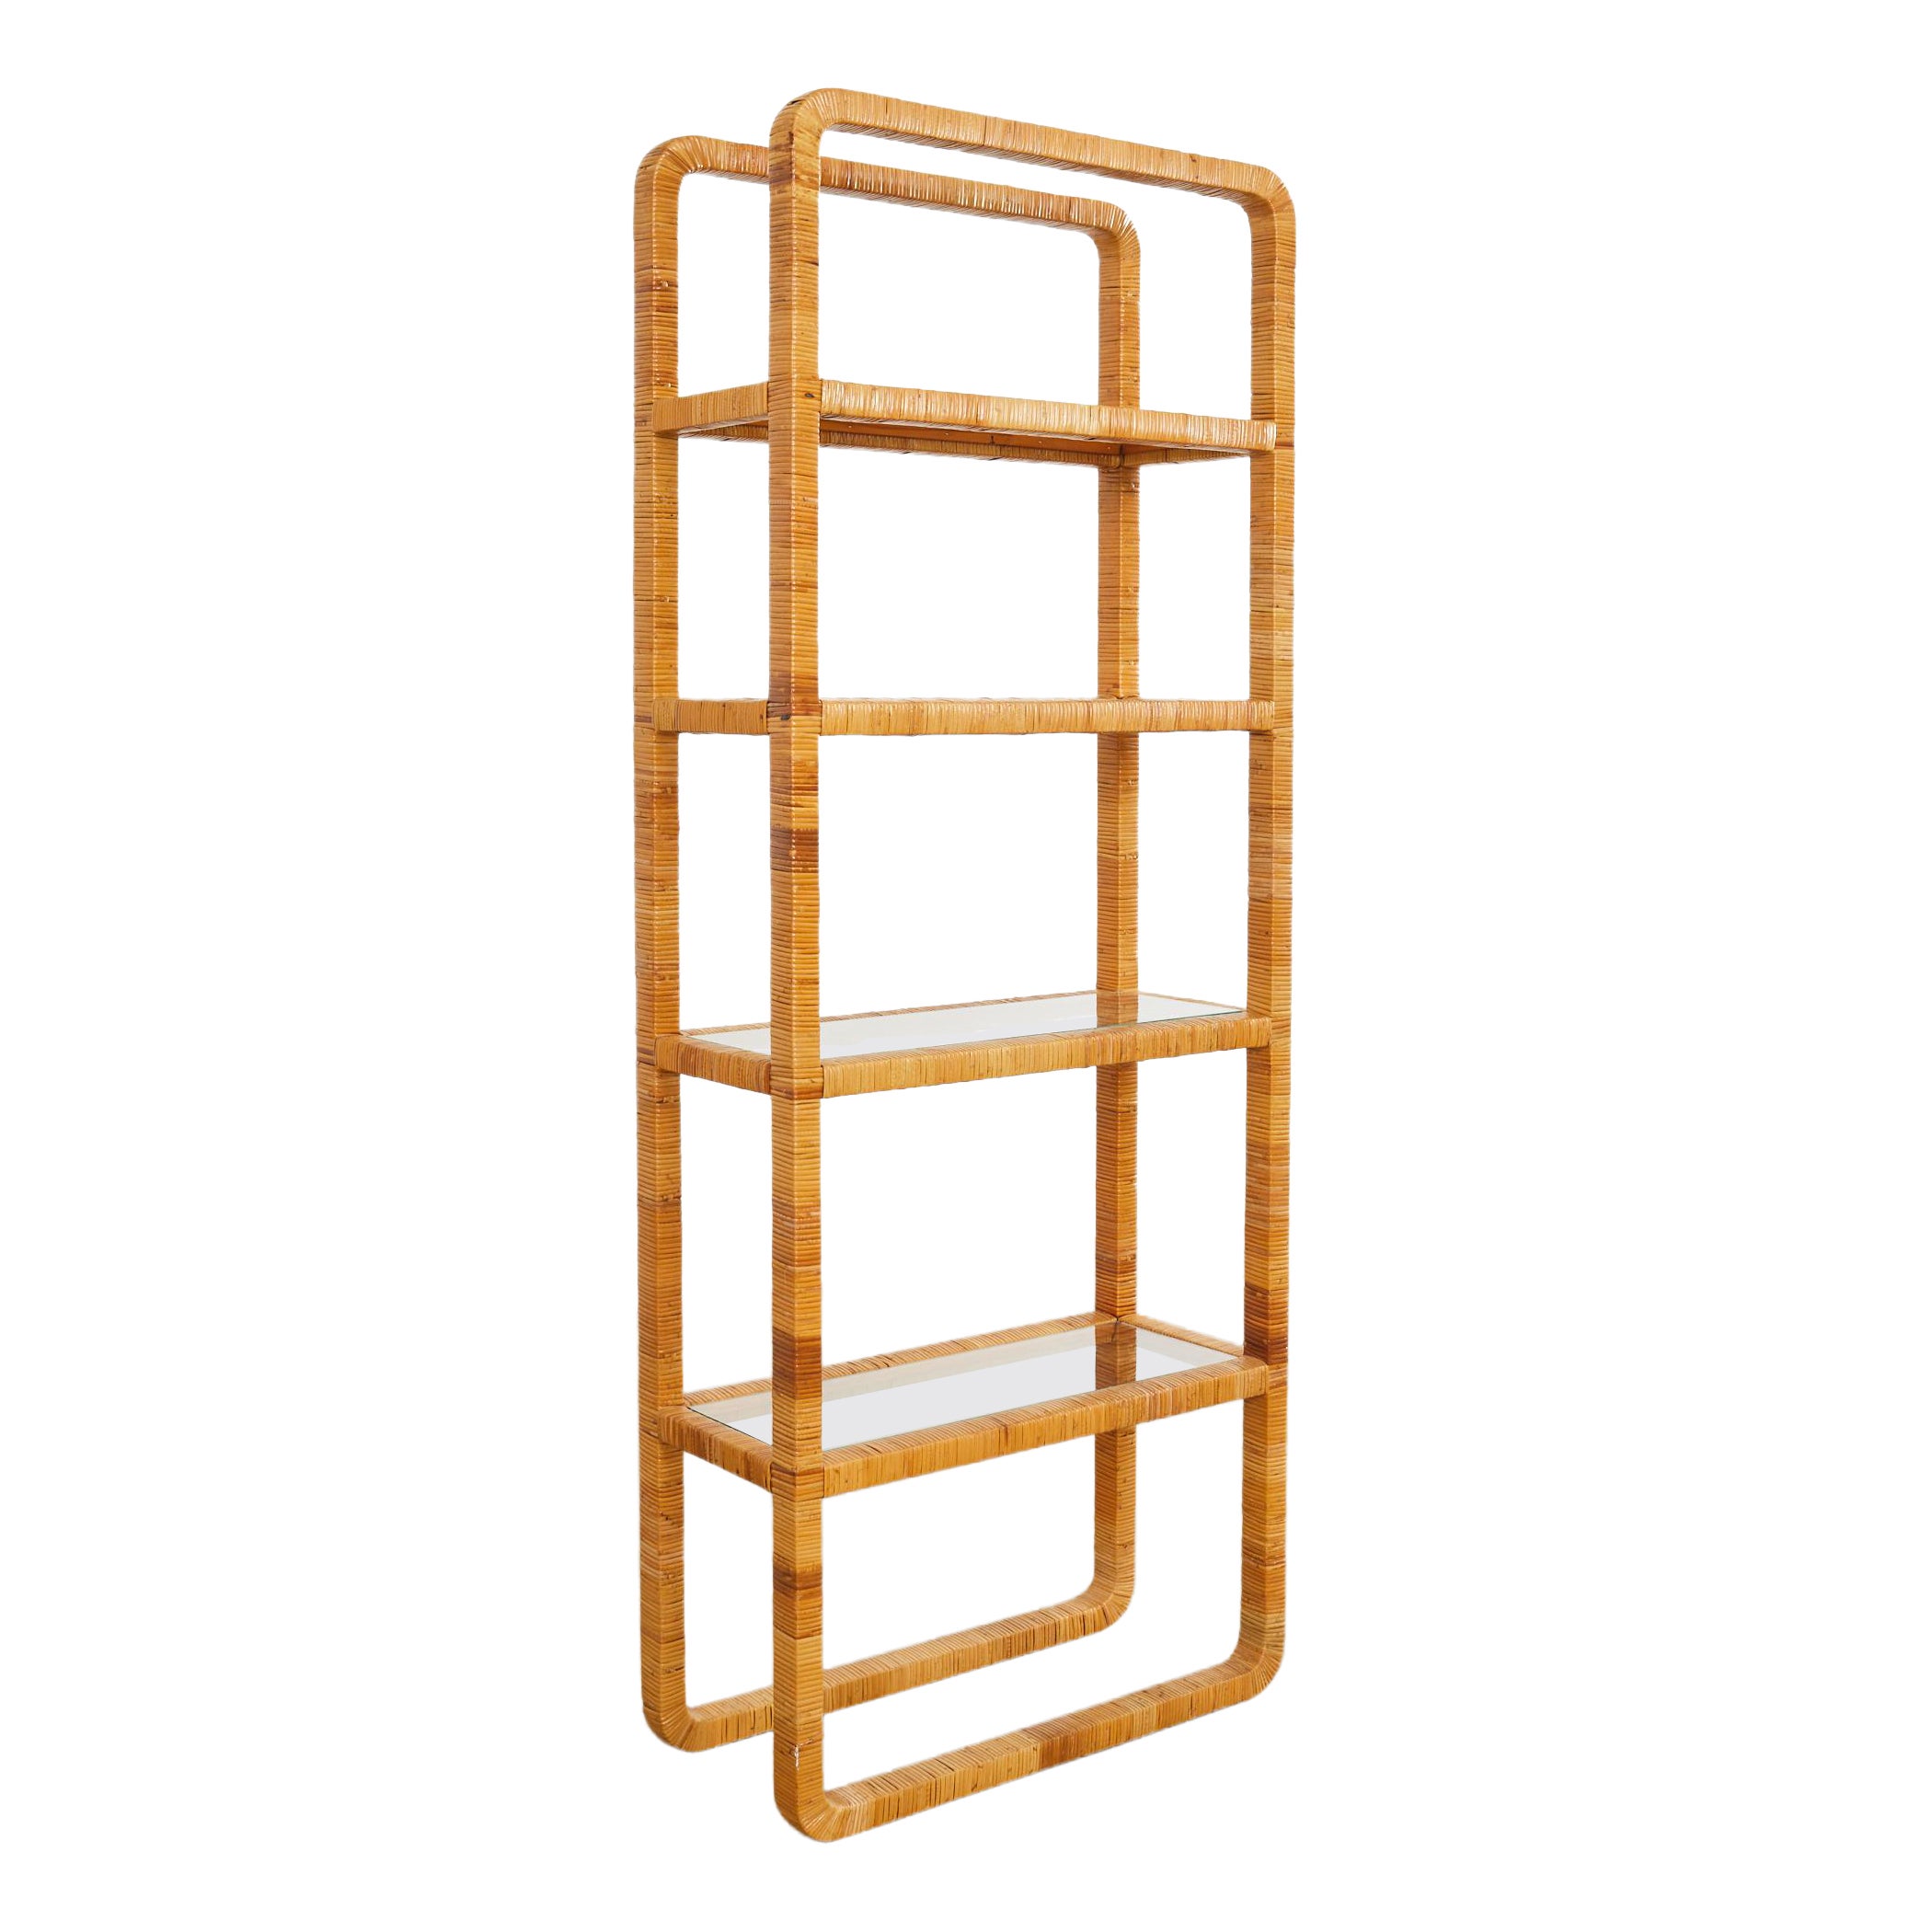 Midcentury Modern Rattan Wrapped Four Shelf Etagere Bookcase For Sale